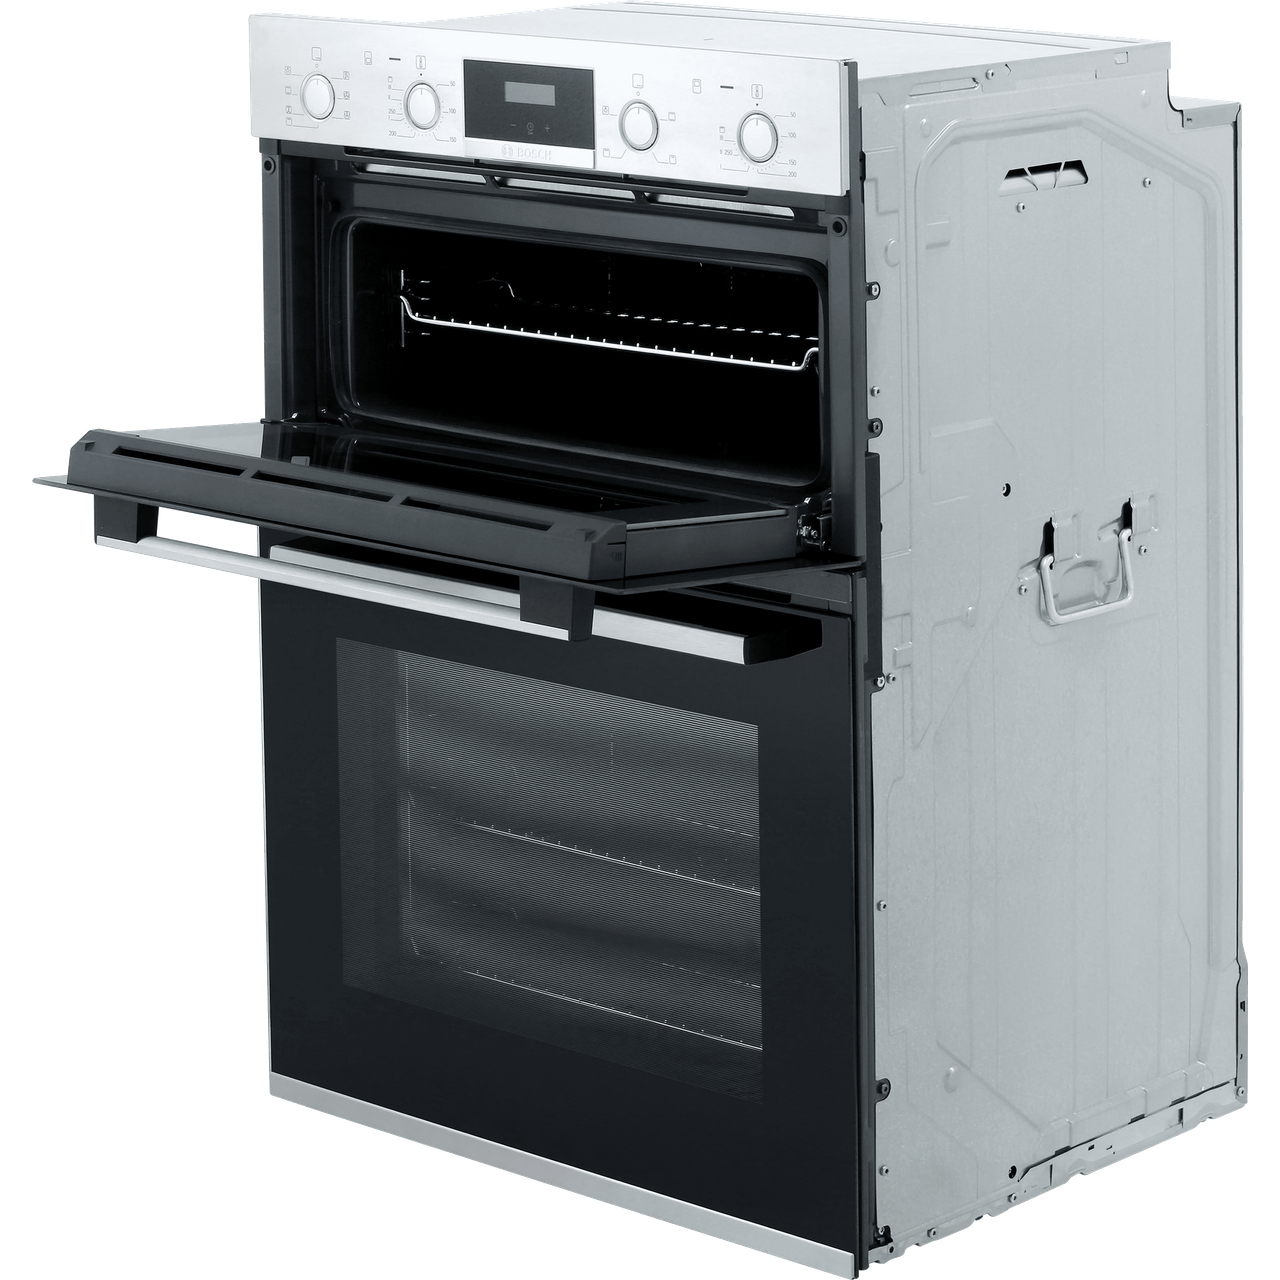 Bosch MBS533BS0B Built In 59cm Electric Double Oven A/B Stainless Steel